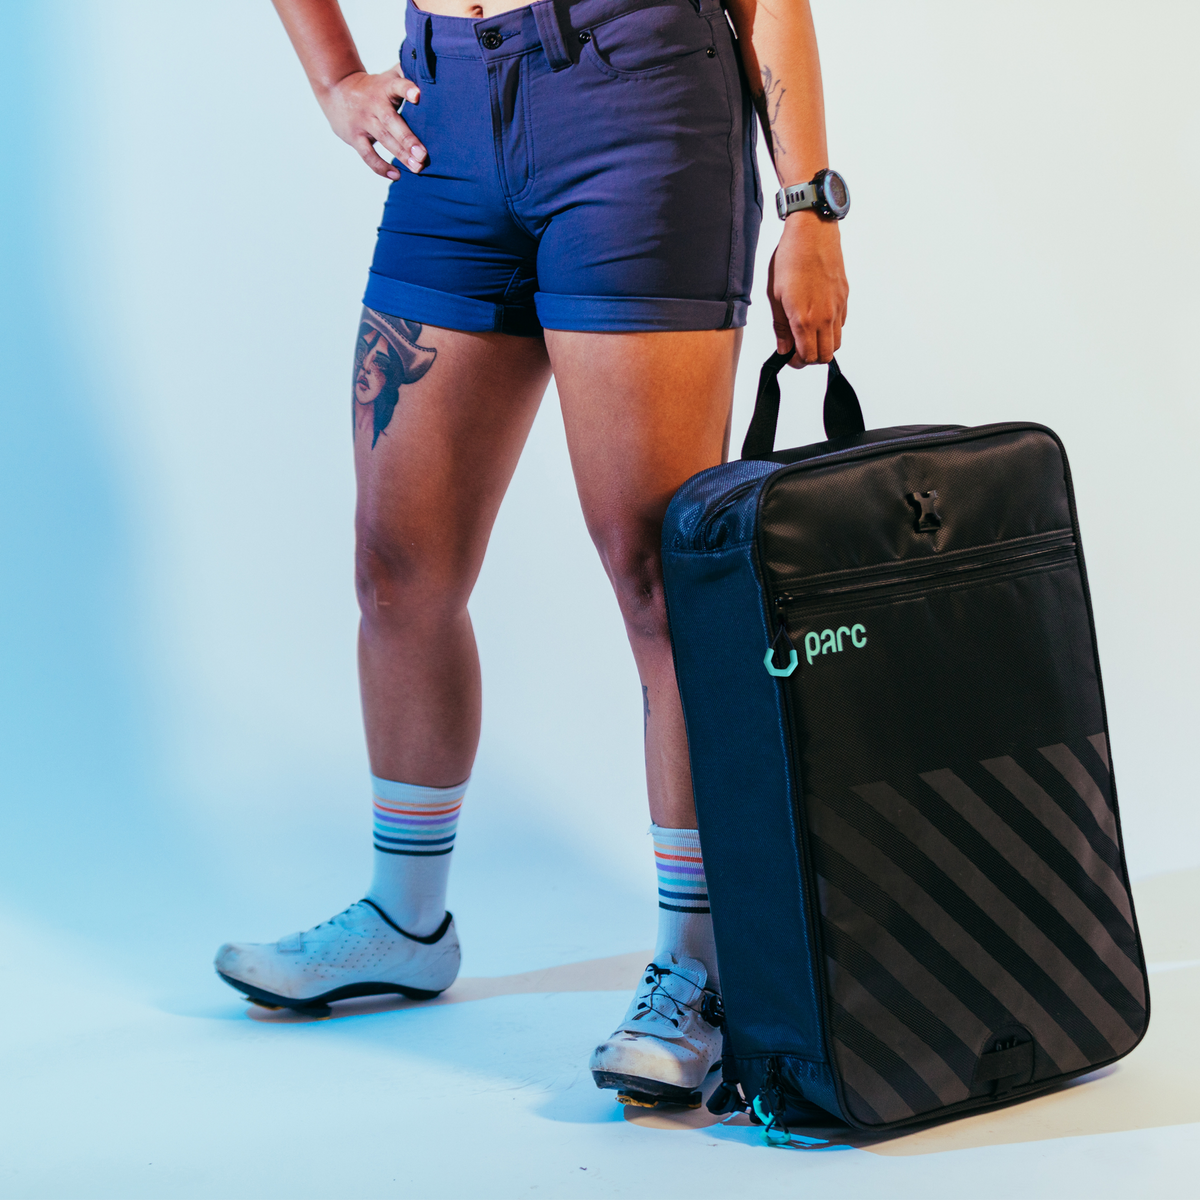 Woman standing in cycling shoes holding Parcs cycling gear bag at her side. Cycling kit bag is zipped up. Black cycling gear bag with turquoise accents and diagonal reflective stripes on bottom half of exterior.